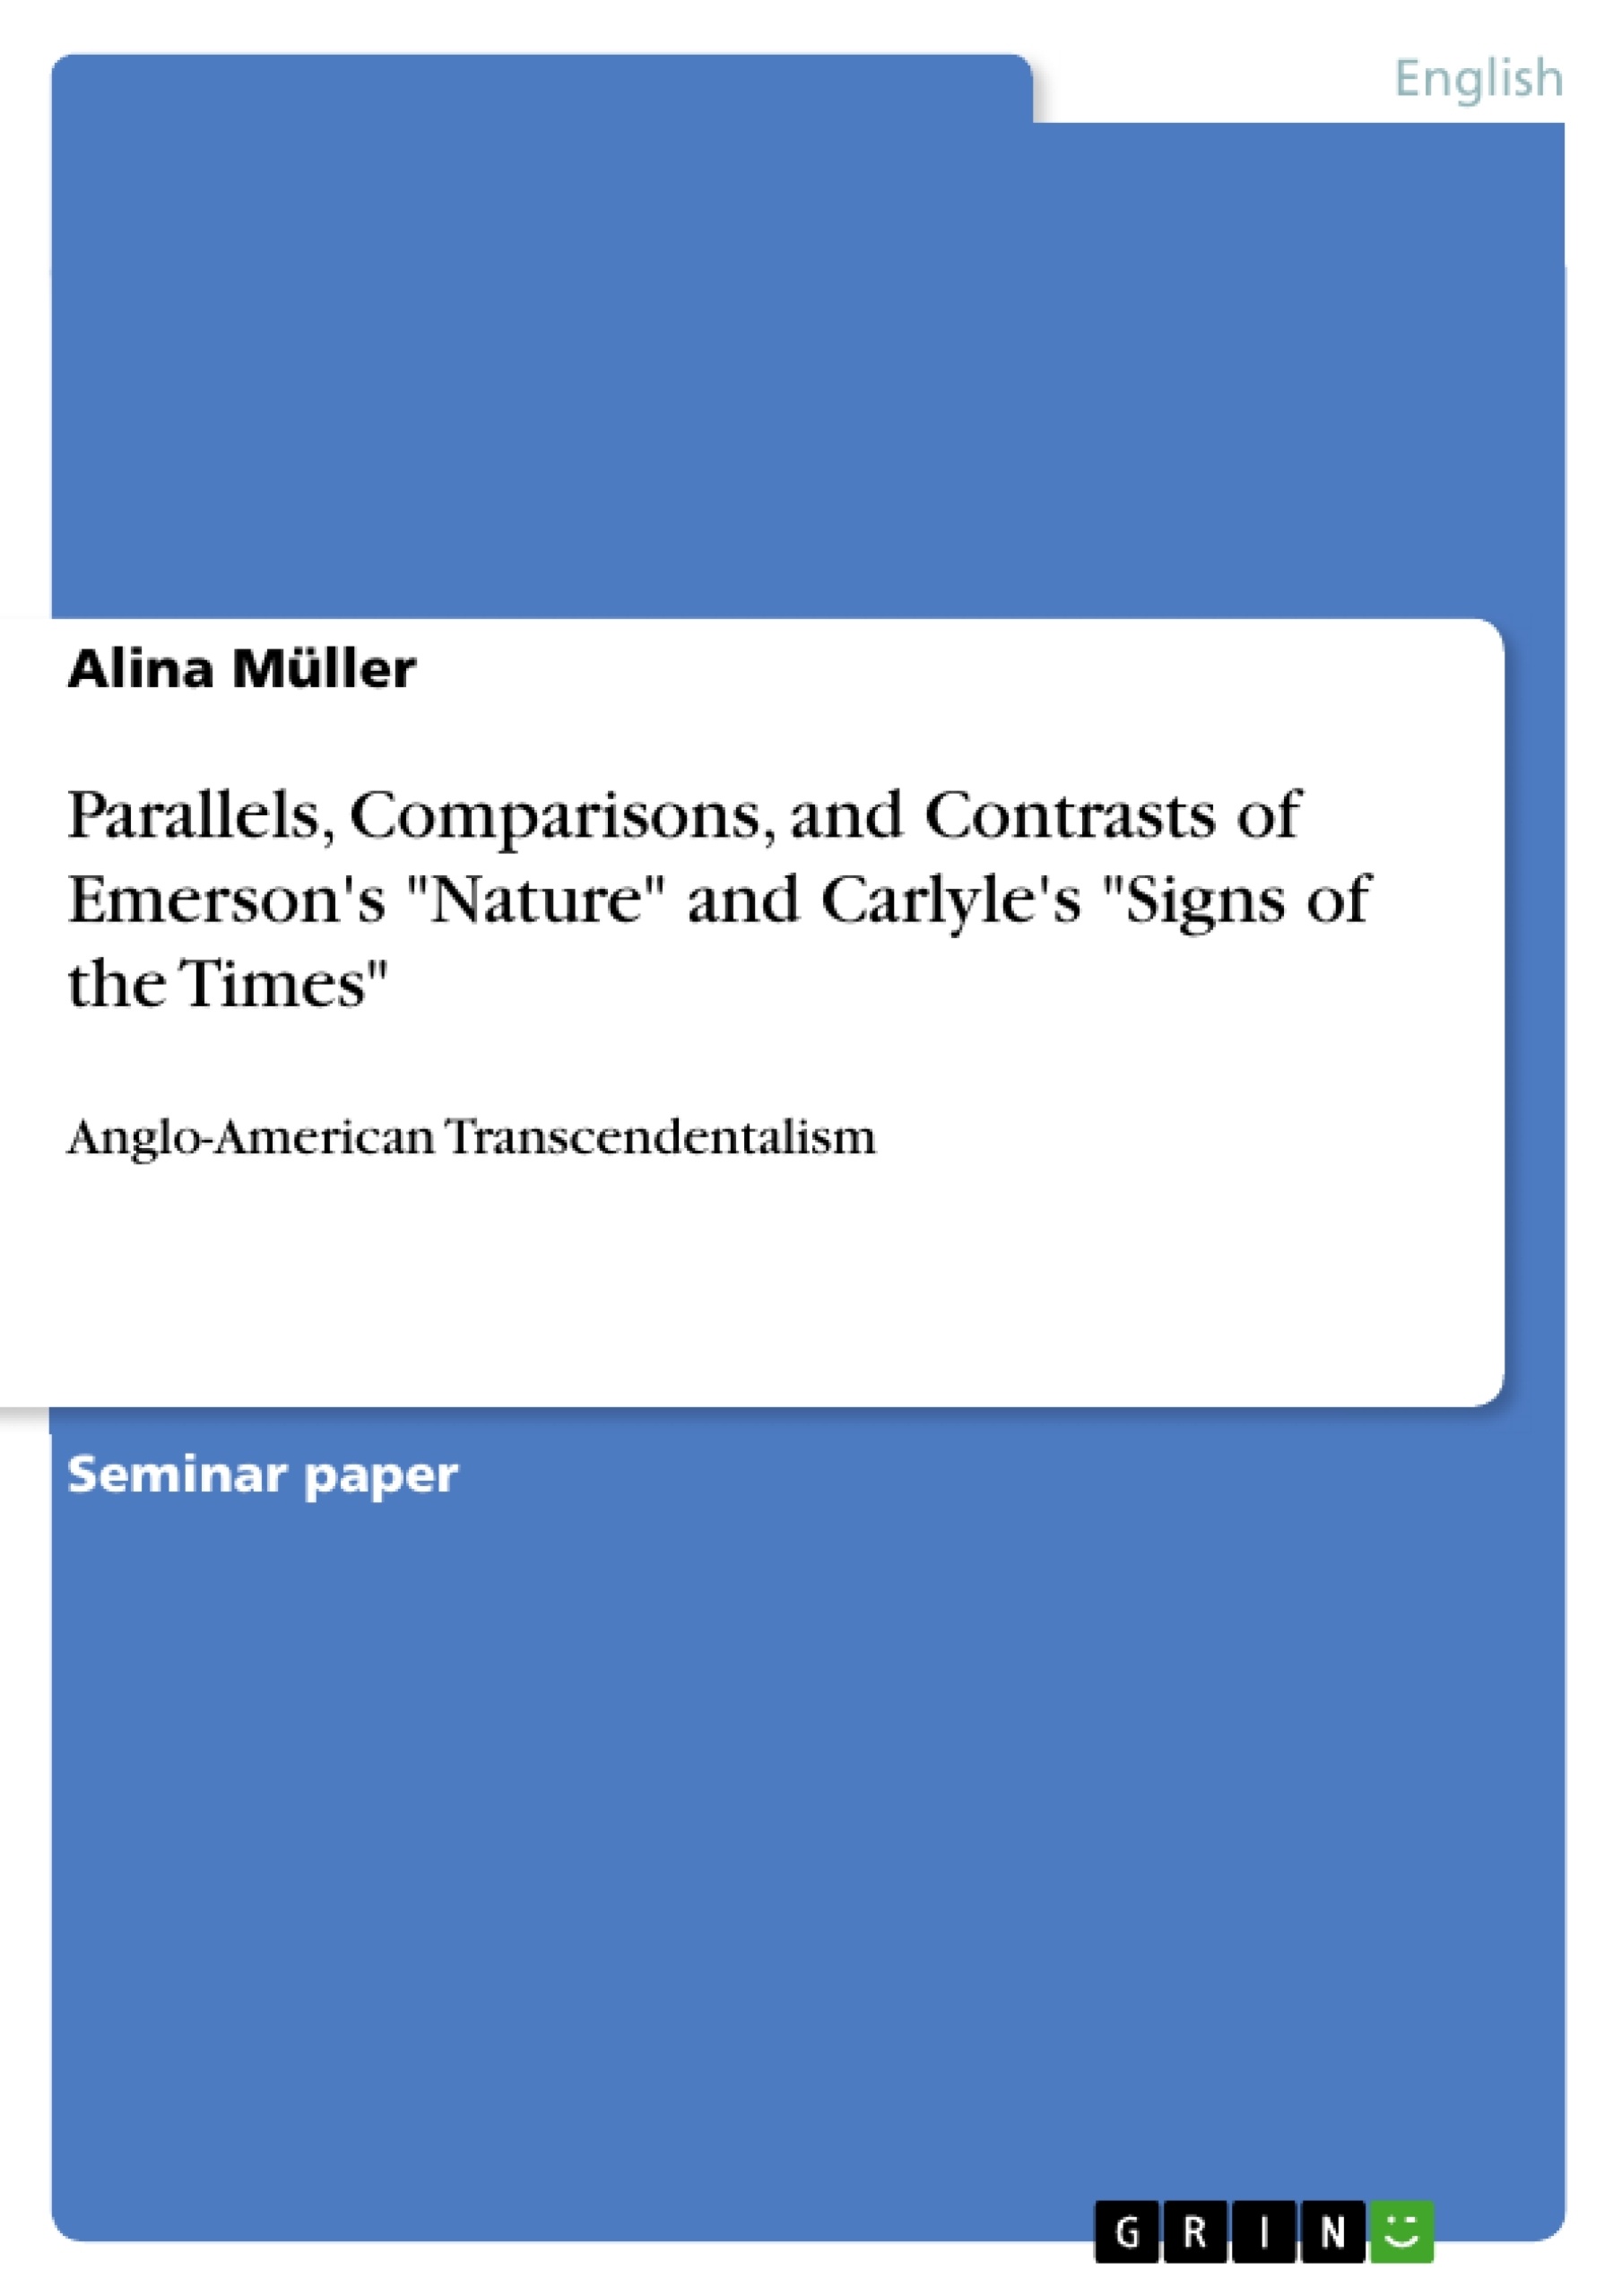 Título: Parallels, Comparisons, and Contrasts of Emerson's "Nature" and Carlyle's "Signs of the Times"